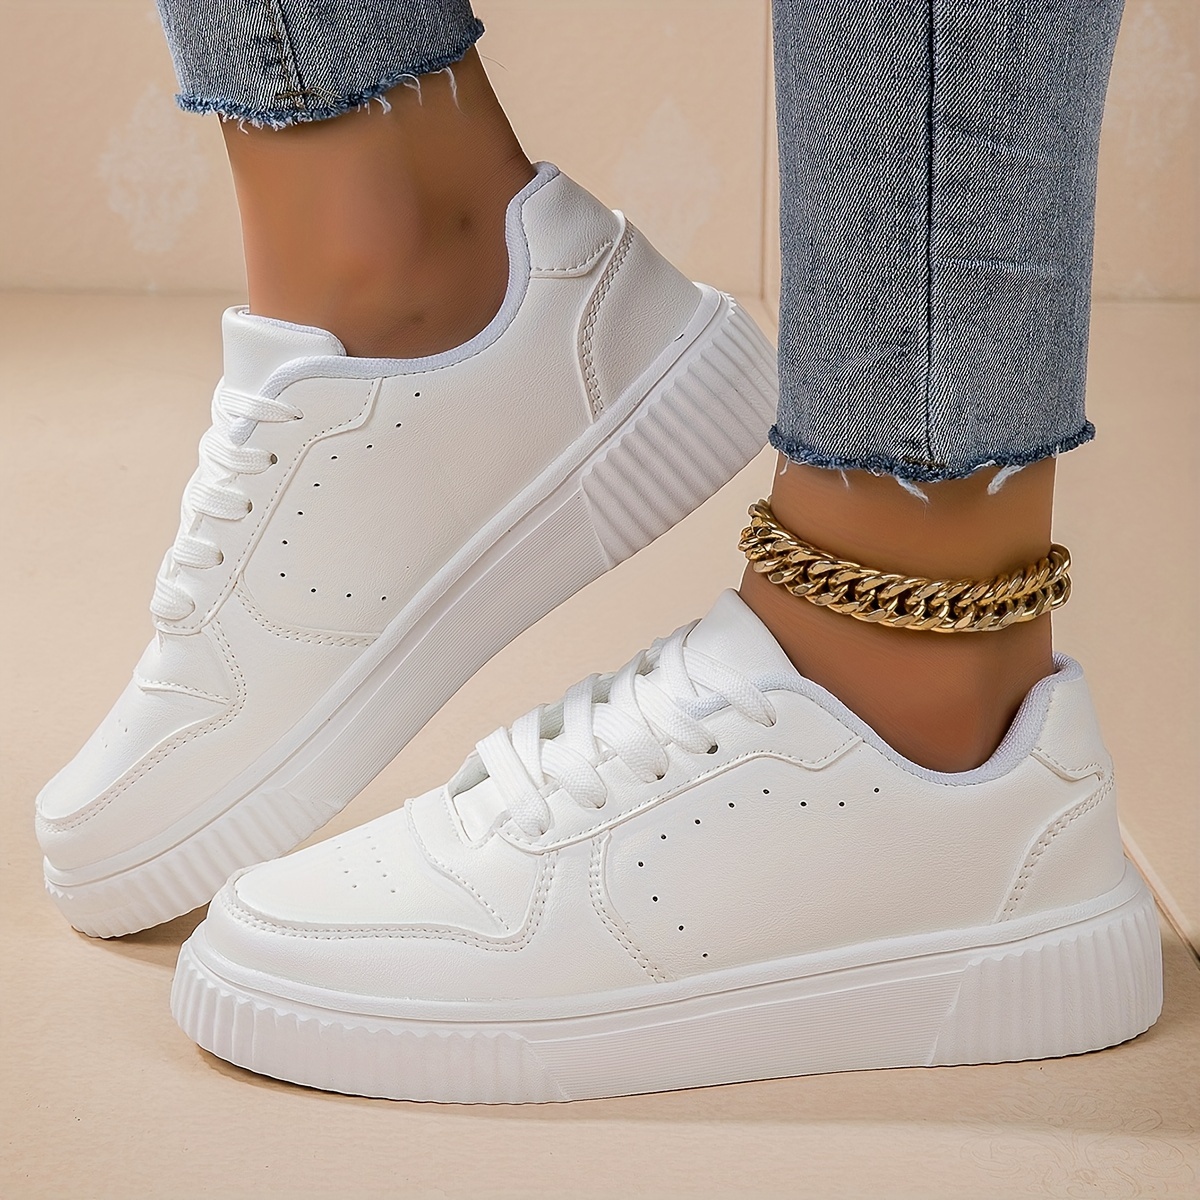 womens solid color sneakers casual lightweight low top skate shoes comfortable white lace up shoes details 0